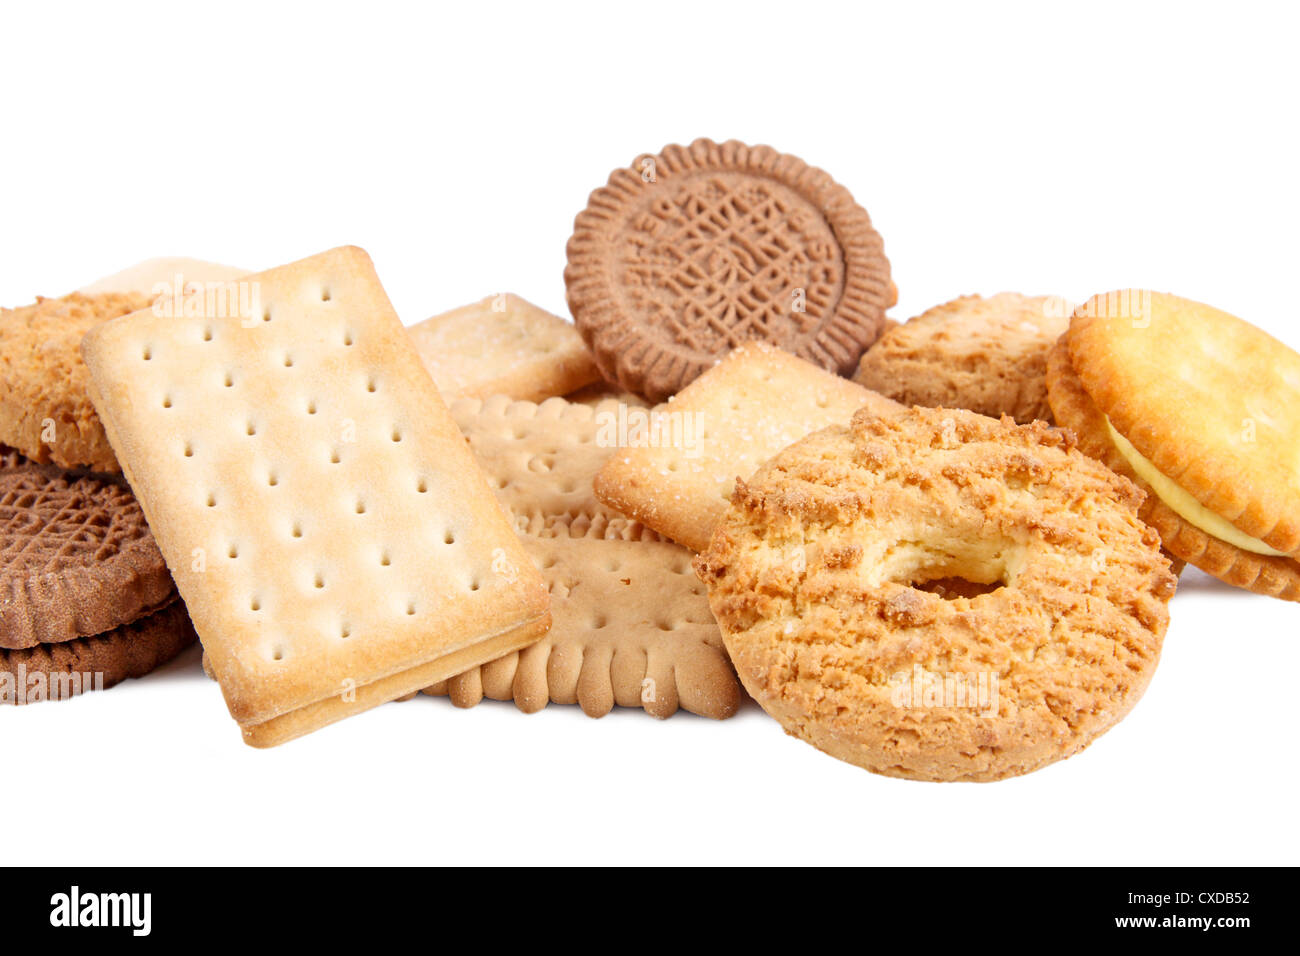 biscuits Stock Photo